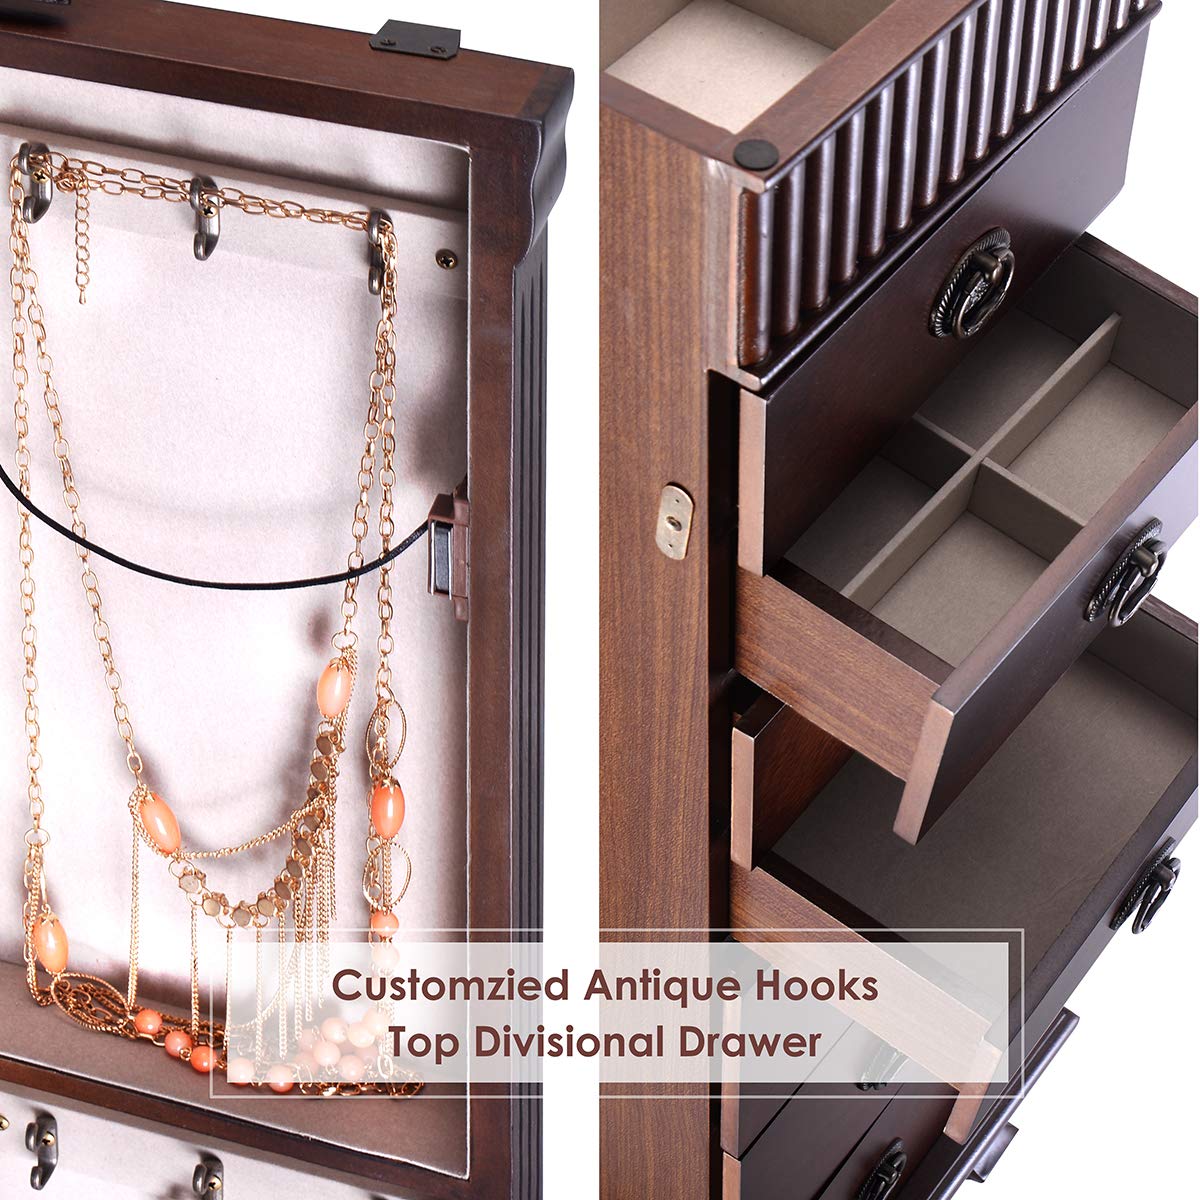 Standing Jewelry Armoire Cabinet Storage Chest - Giantex